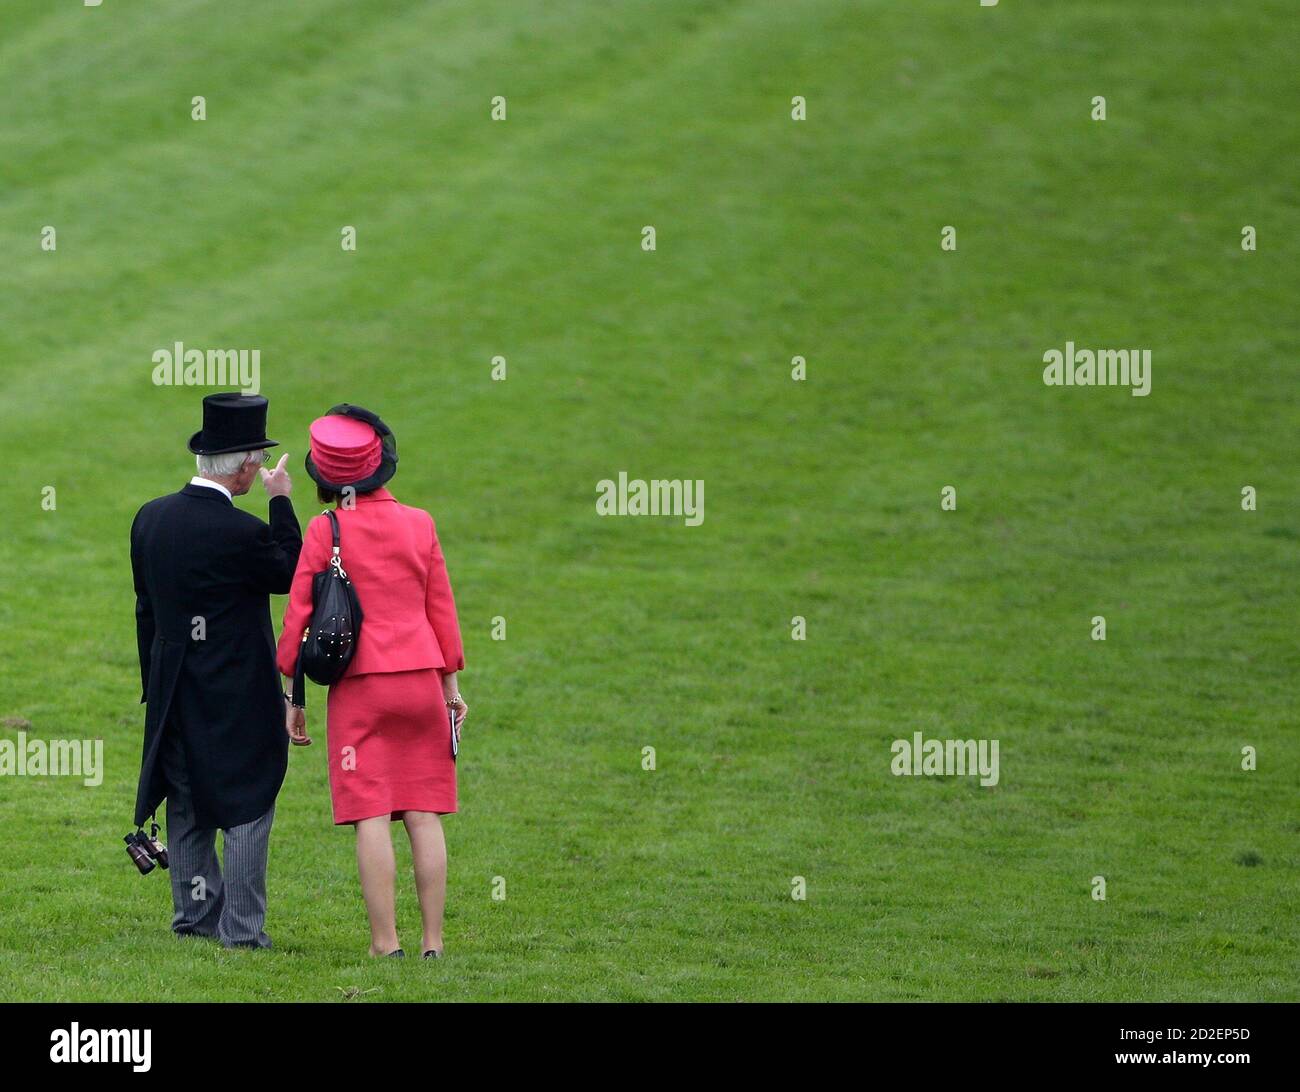 Racegoers view the course before the Derby race during the Epsom Derby Festival at Epsom Downs in Surrey, southern England, June 7, 2008.    REUTERS/Darren Staples   (BRITAIN) Stock Photo